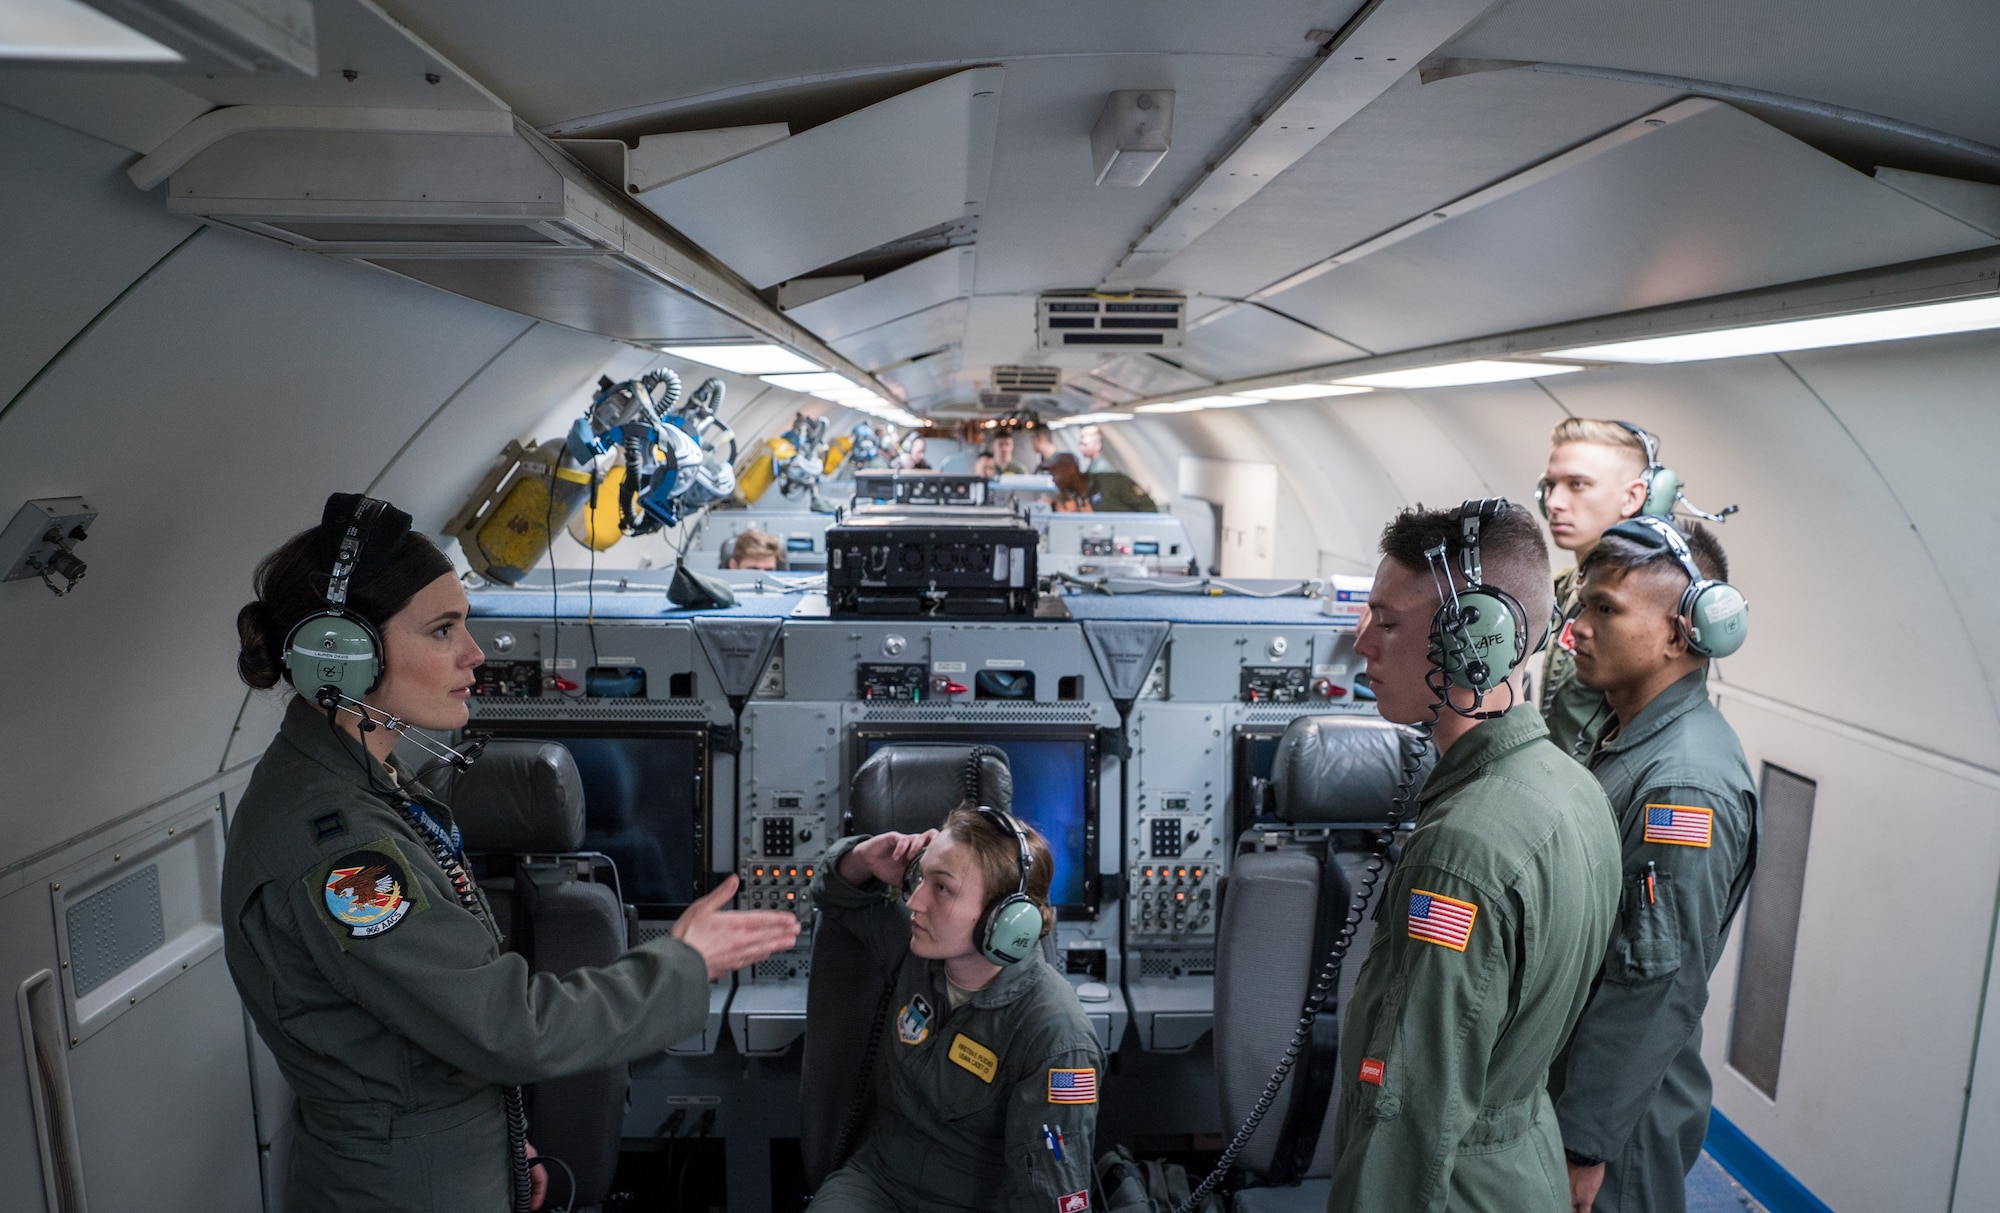 Aircrew members instructs cadets on in-flight operations